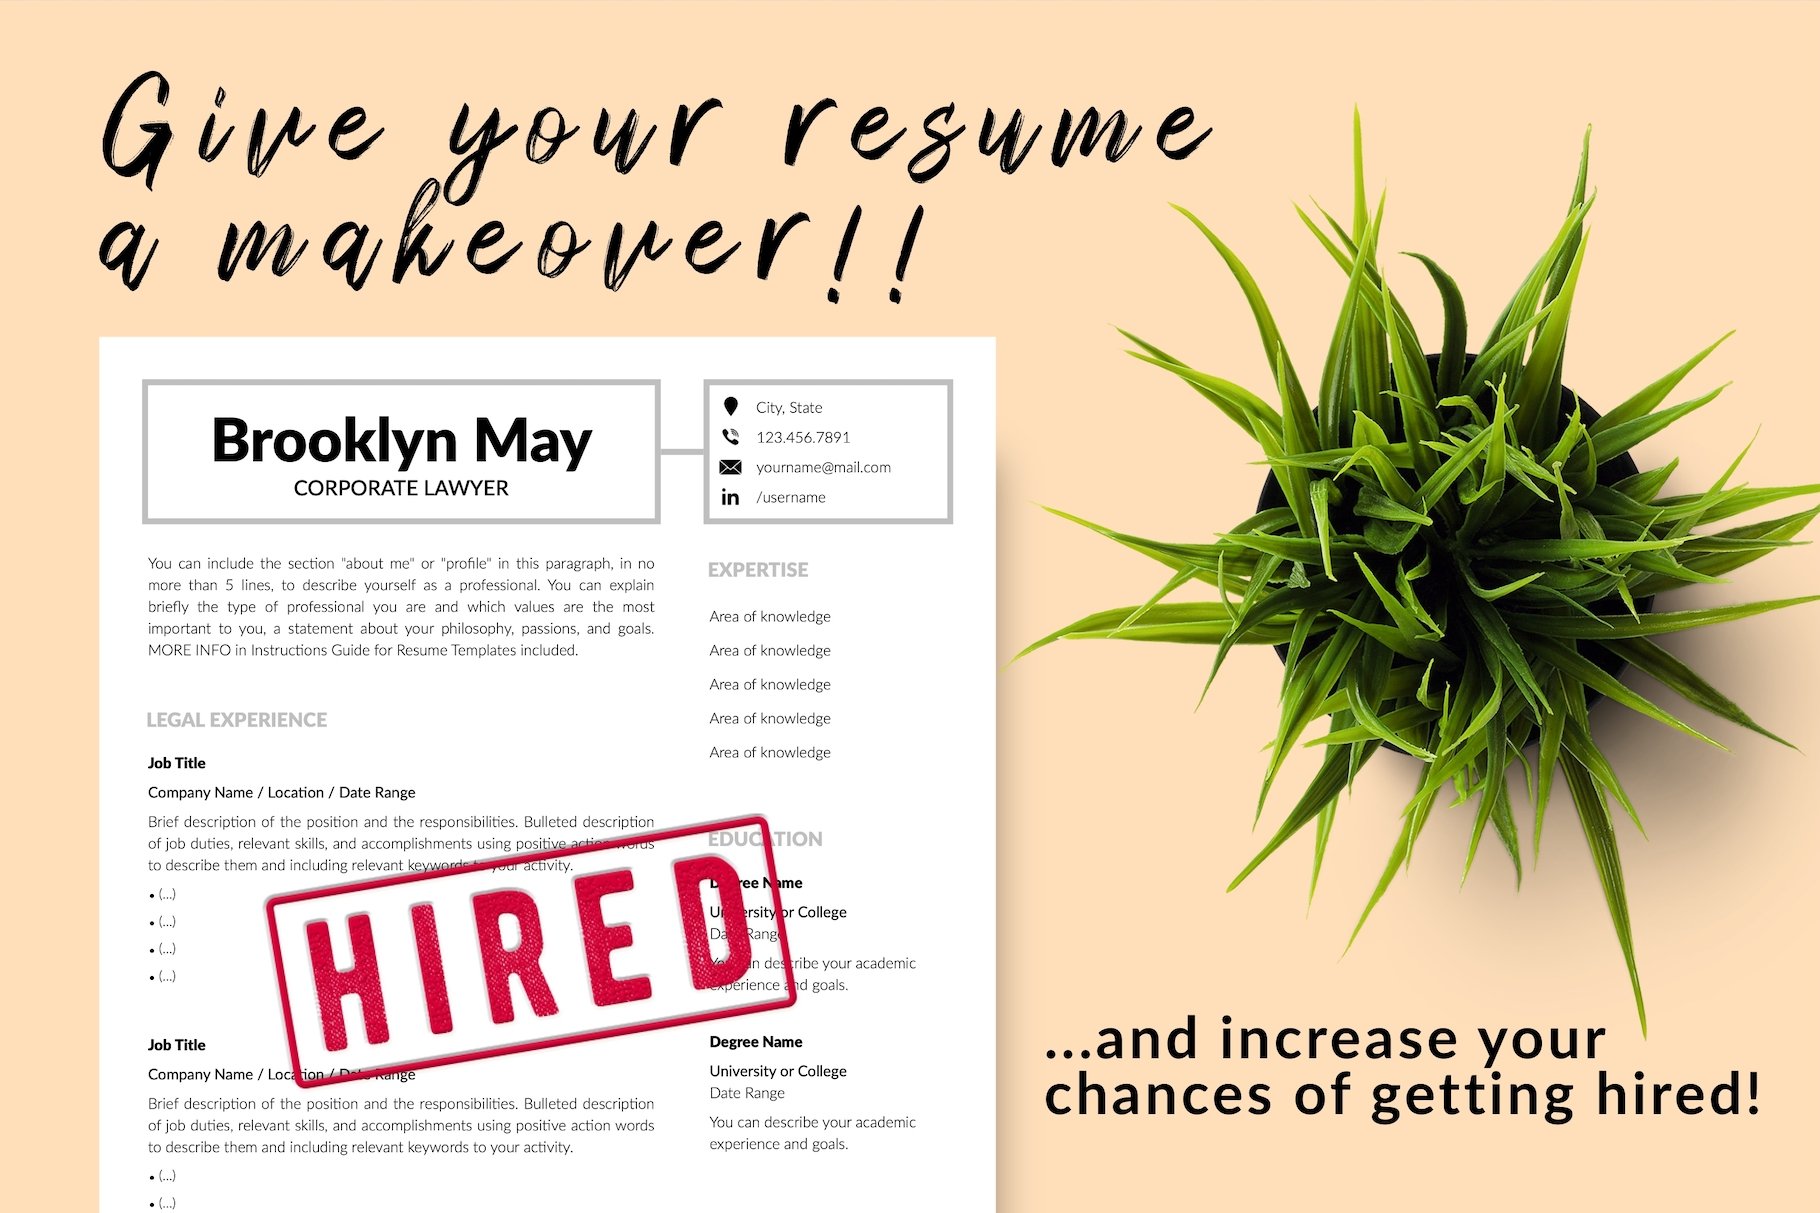 resume cv template brooklyn may for creative market 16 give your resume a makeover 408